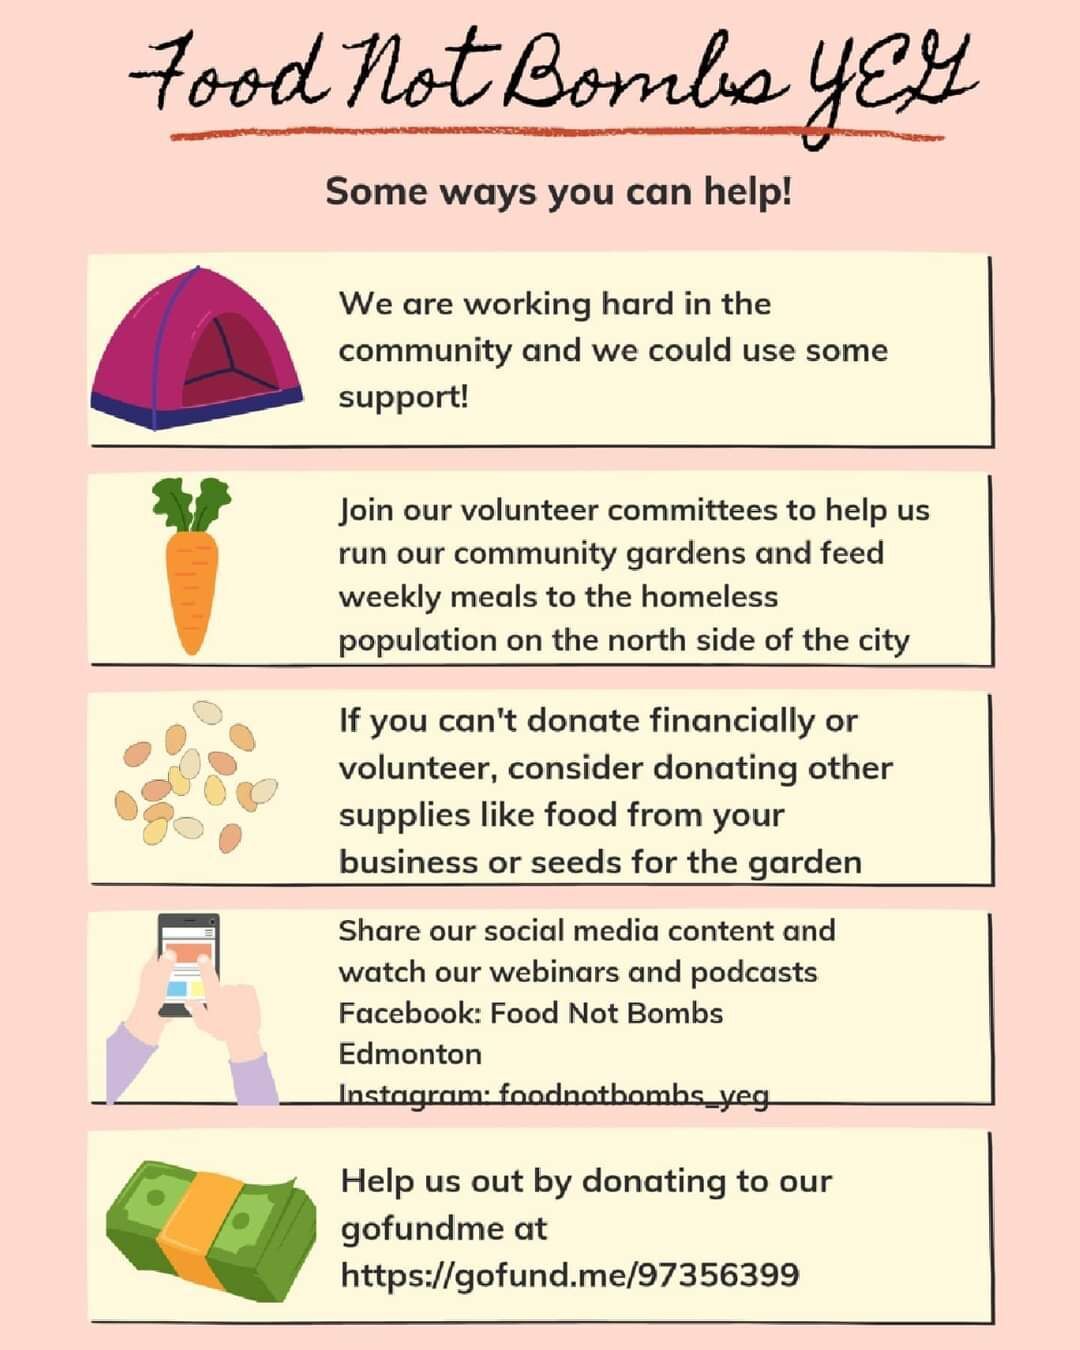 Poster with the following text:
Food Not Bombs YEG
Some ways you can help!

We are working hard in the community and we could use some support!

Join our volunteer committees to help us run our community gardens and feed weekly meals to the homeless population on the north side of the city.

If you can't donate financially or volunteer, consider donating other supplies like food from your business or seeds for the garden.

Share our social media content and watch our webinars and podcasts.
Facebook: Food Not Bombs Edmonton
Instagram: foodnotbombs_yeg

Help us out by donating to our gofundme at https://gofund.me/97356399